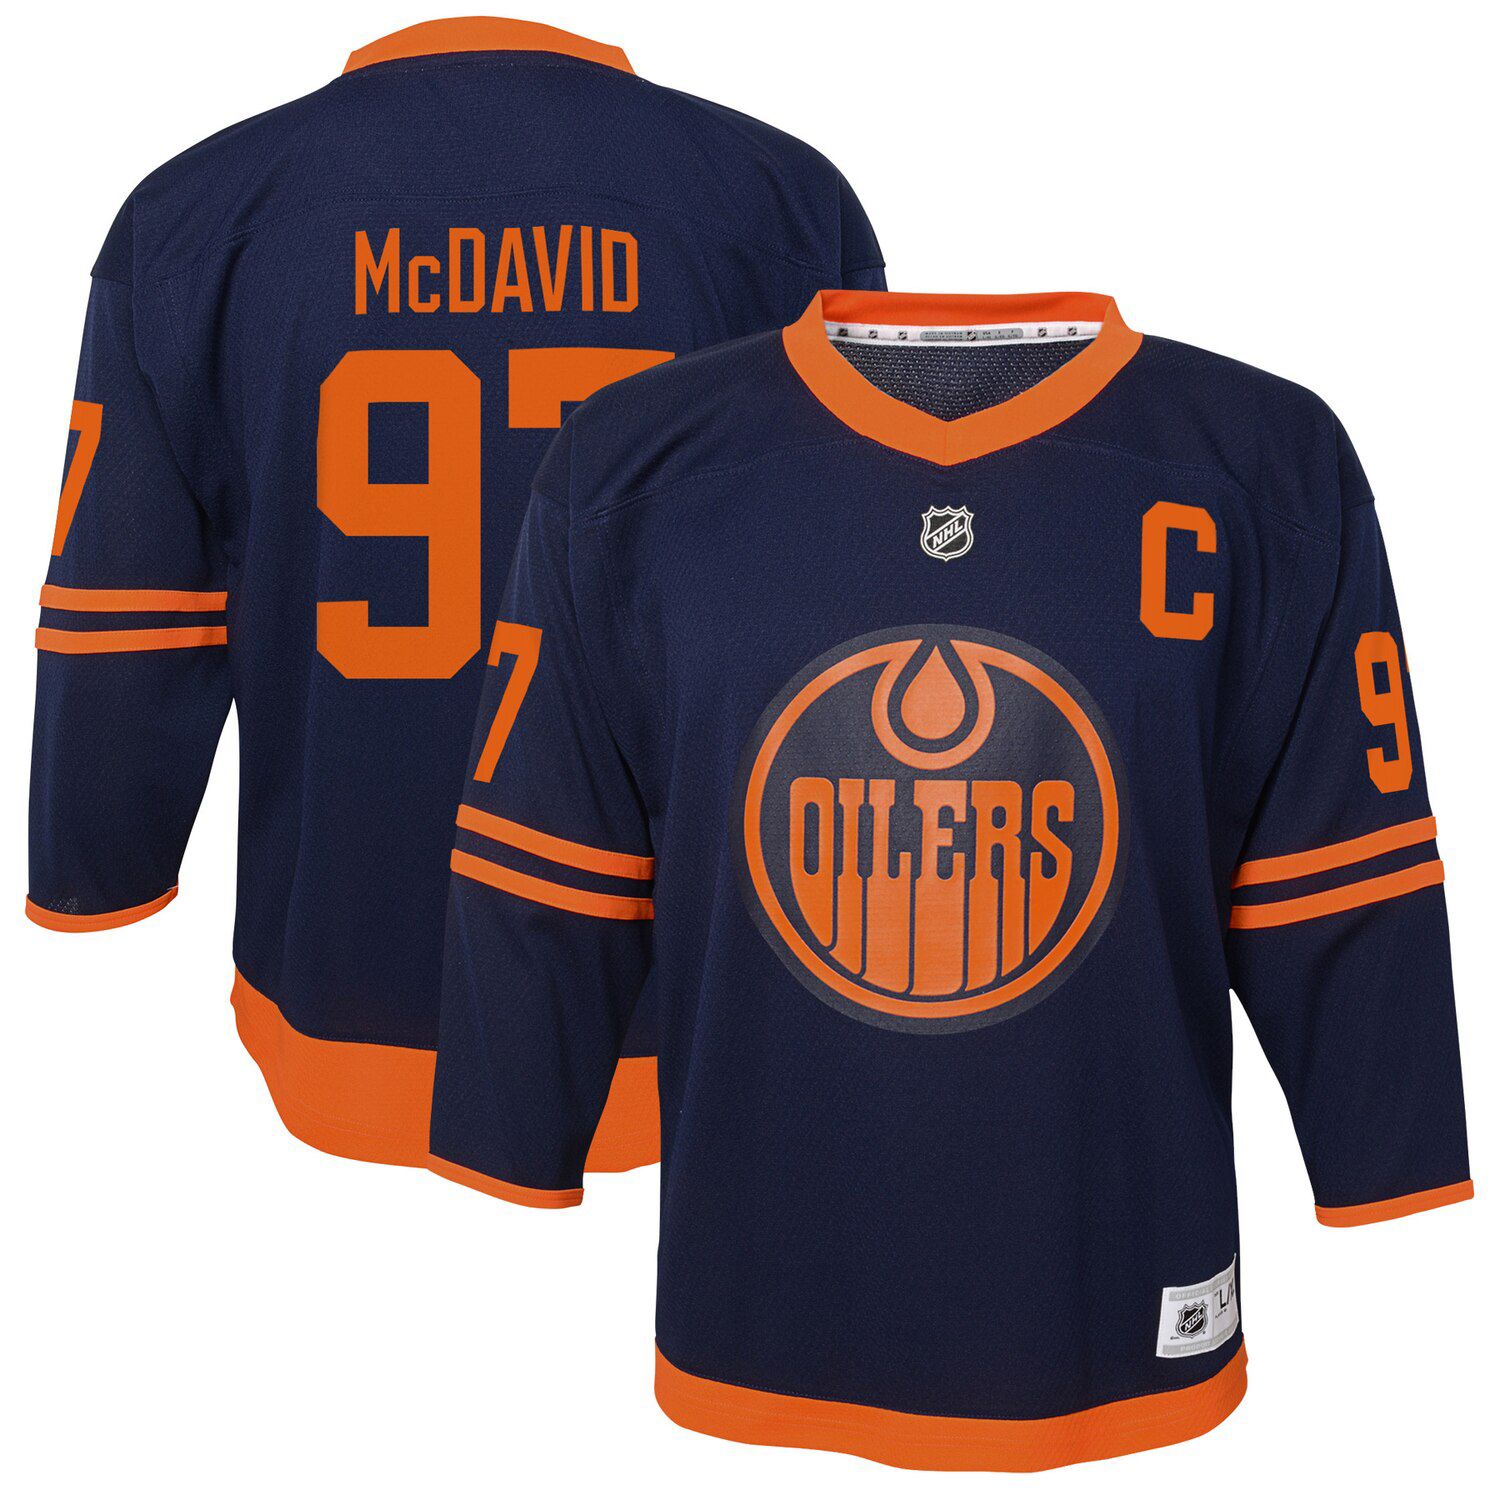 mcdavid oilers jersey for sale